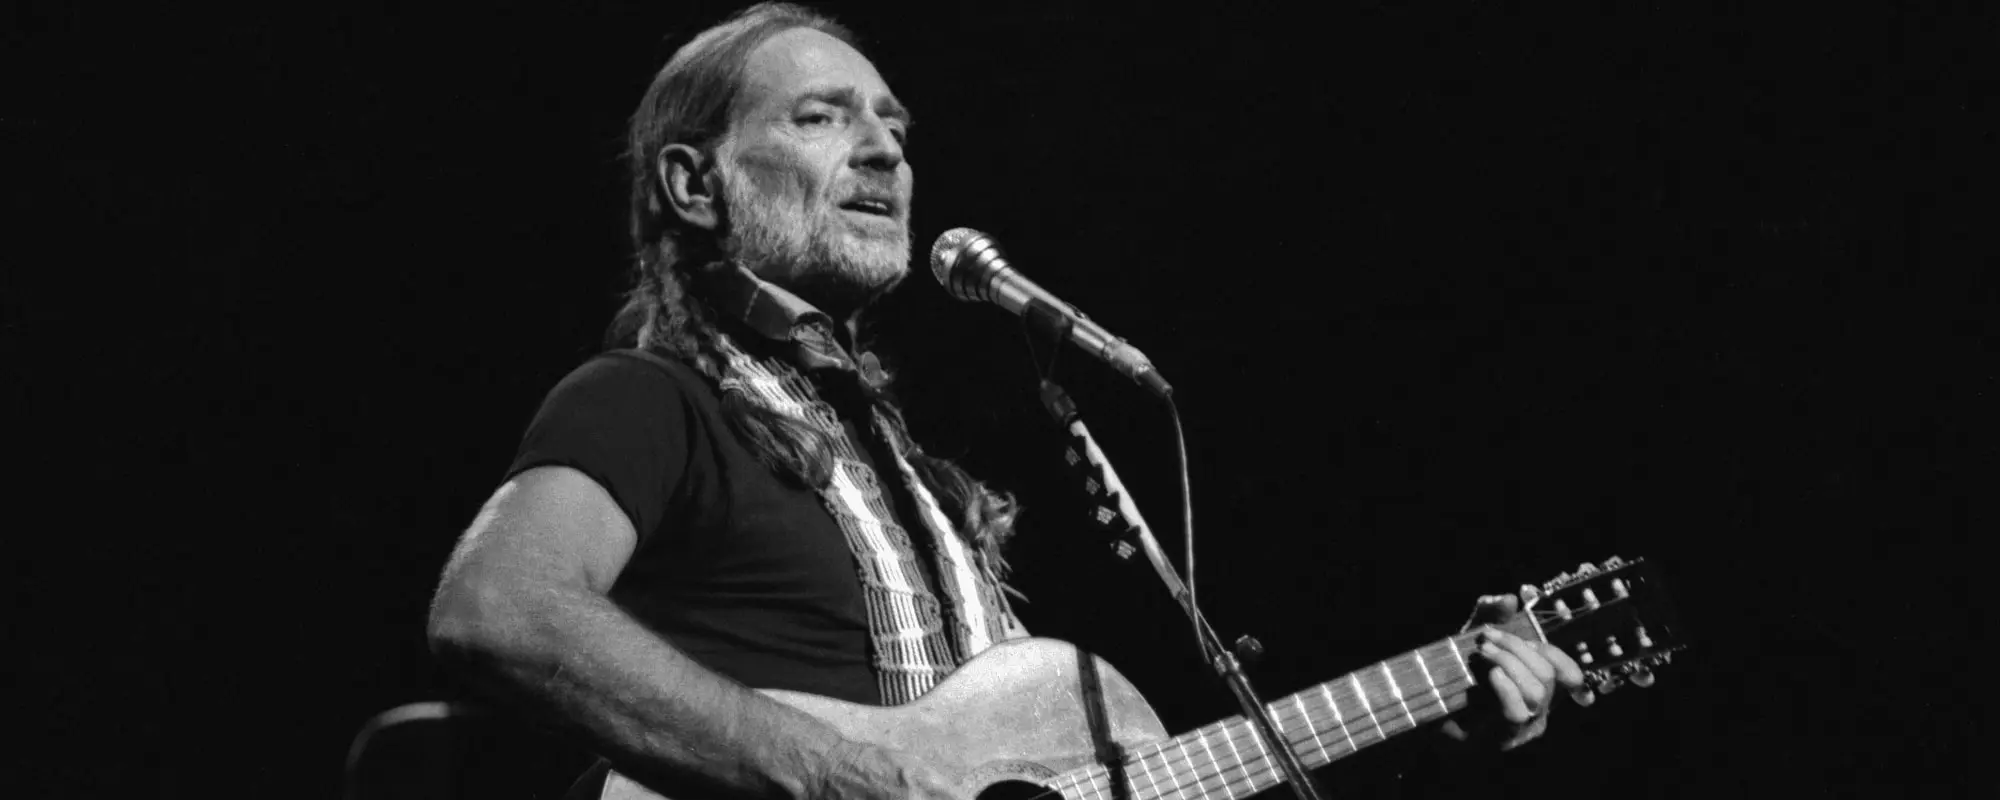 Remember When: Country Star Willie Nelson Cut His First Single Near Seattle